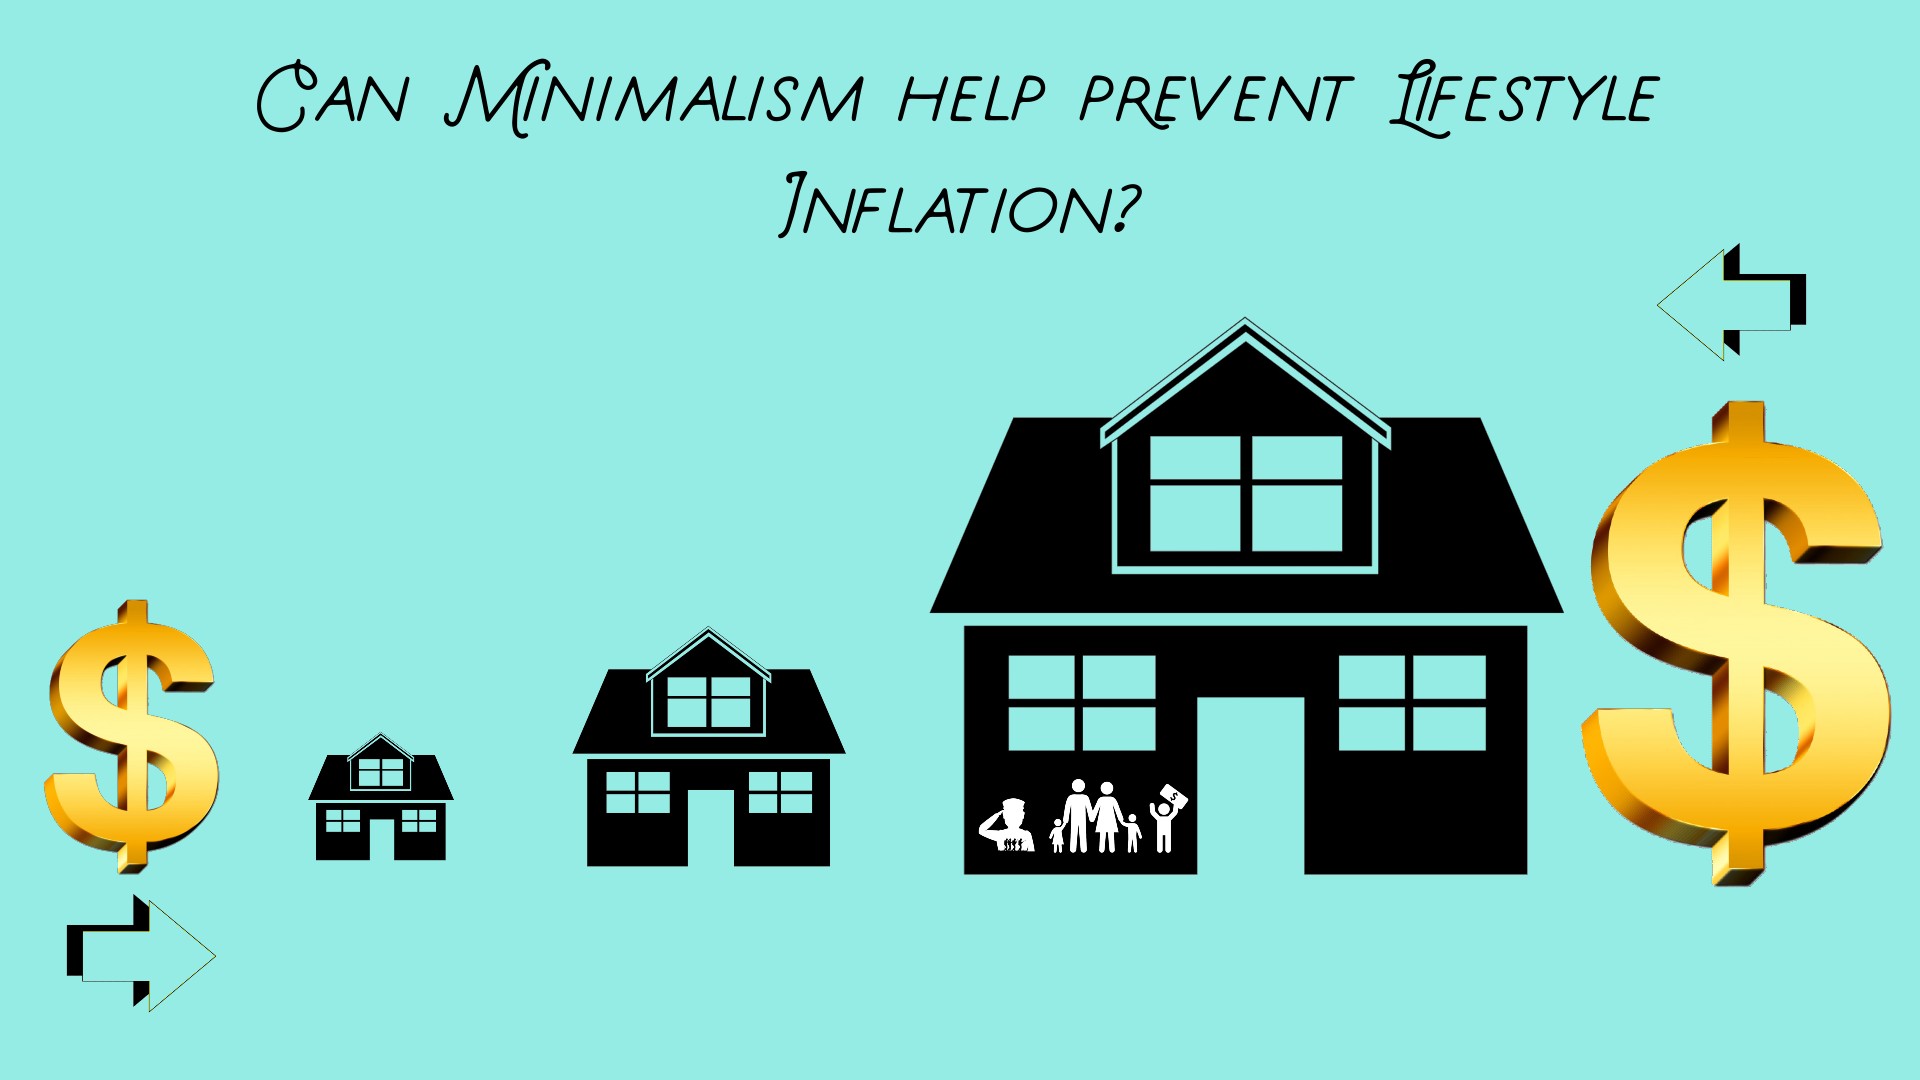 Does Minimalism help prevent Lifestyle Inflation?